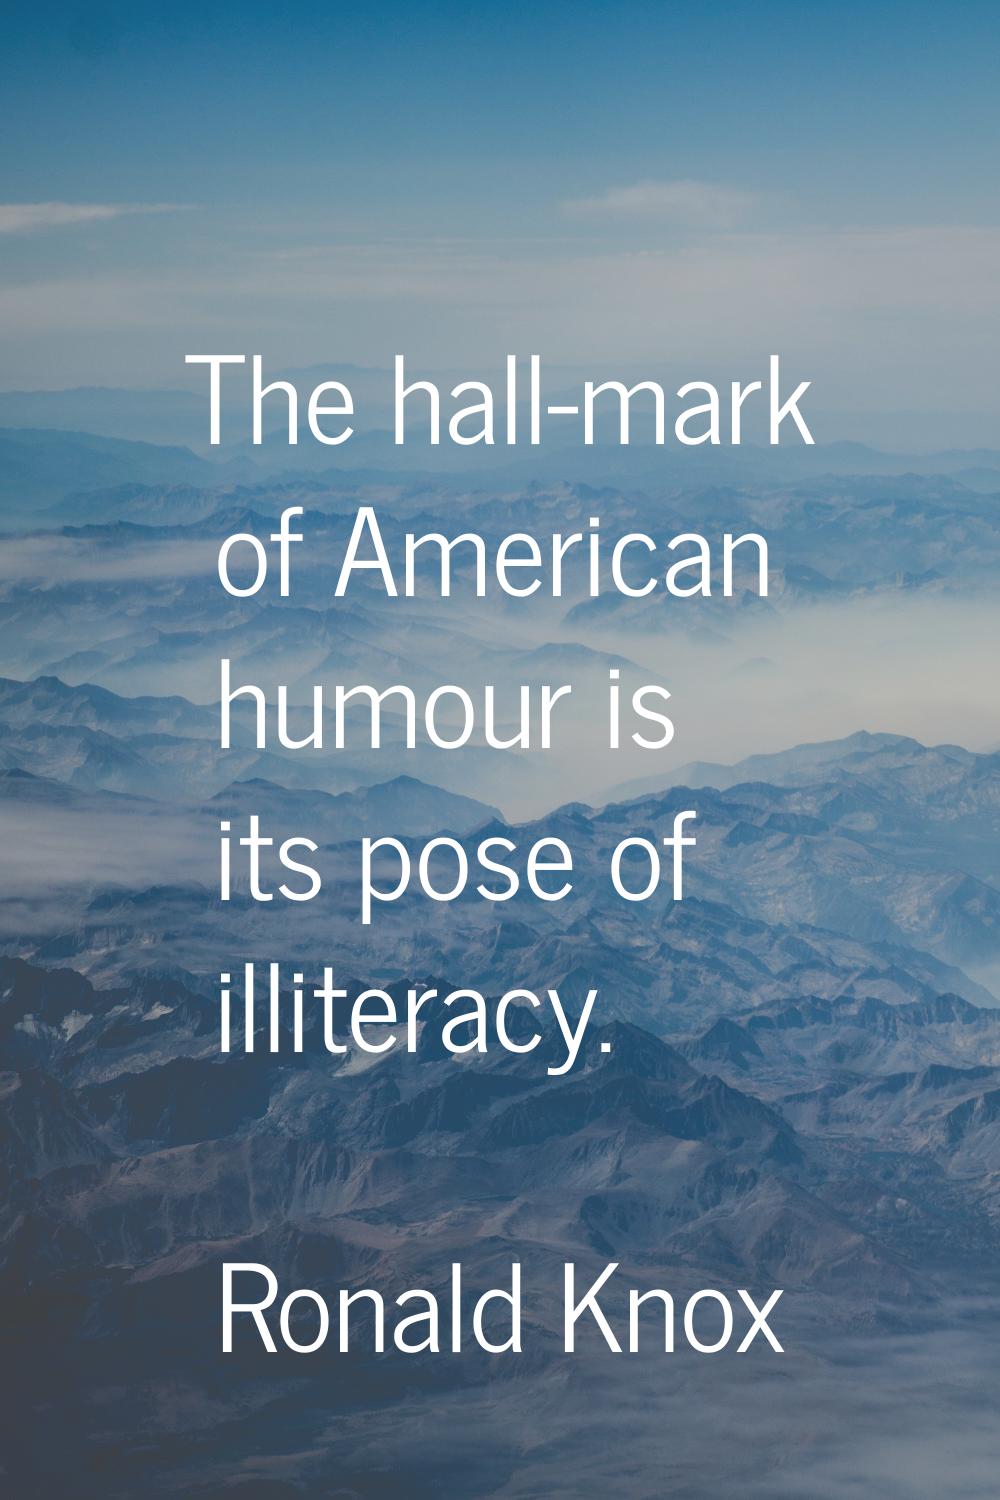 The hall-mark of American humour is its pose of illiteracy.